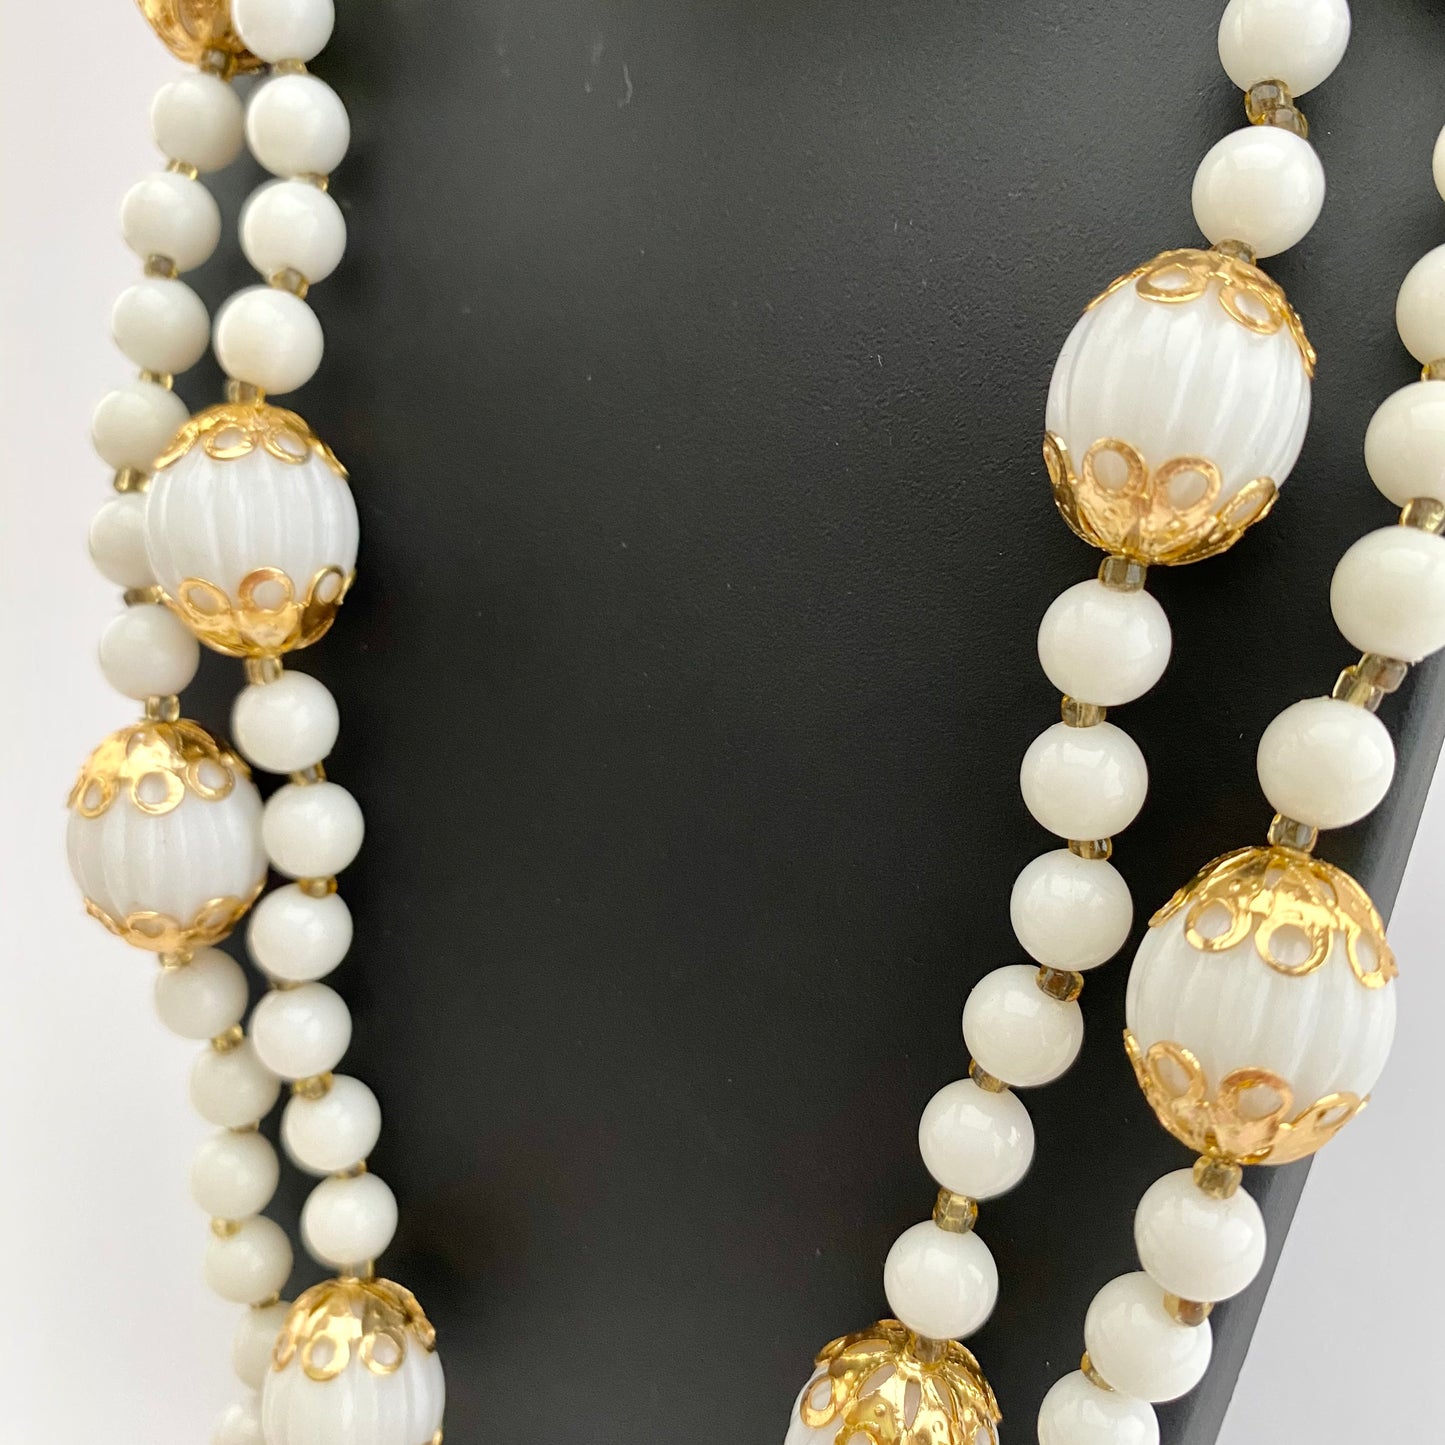 Late 60s/ Early 70s Hong Kong Bead Necklace